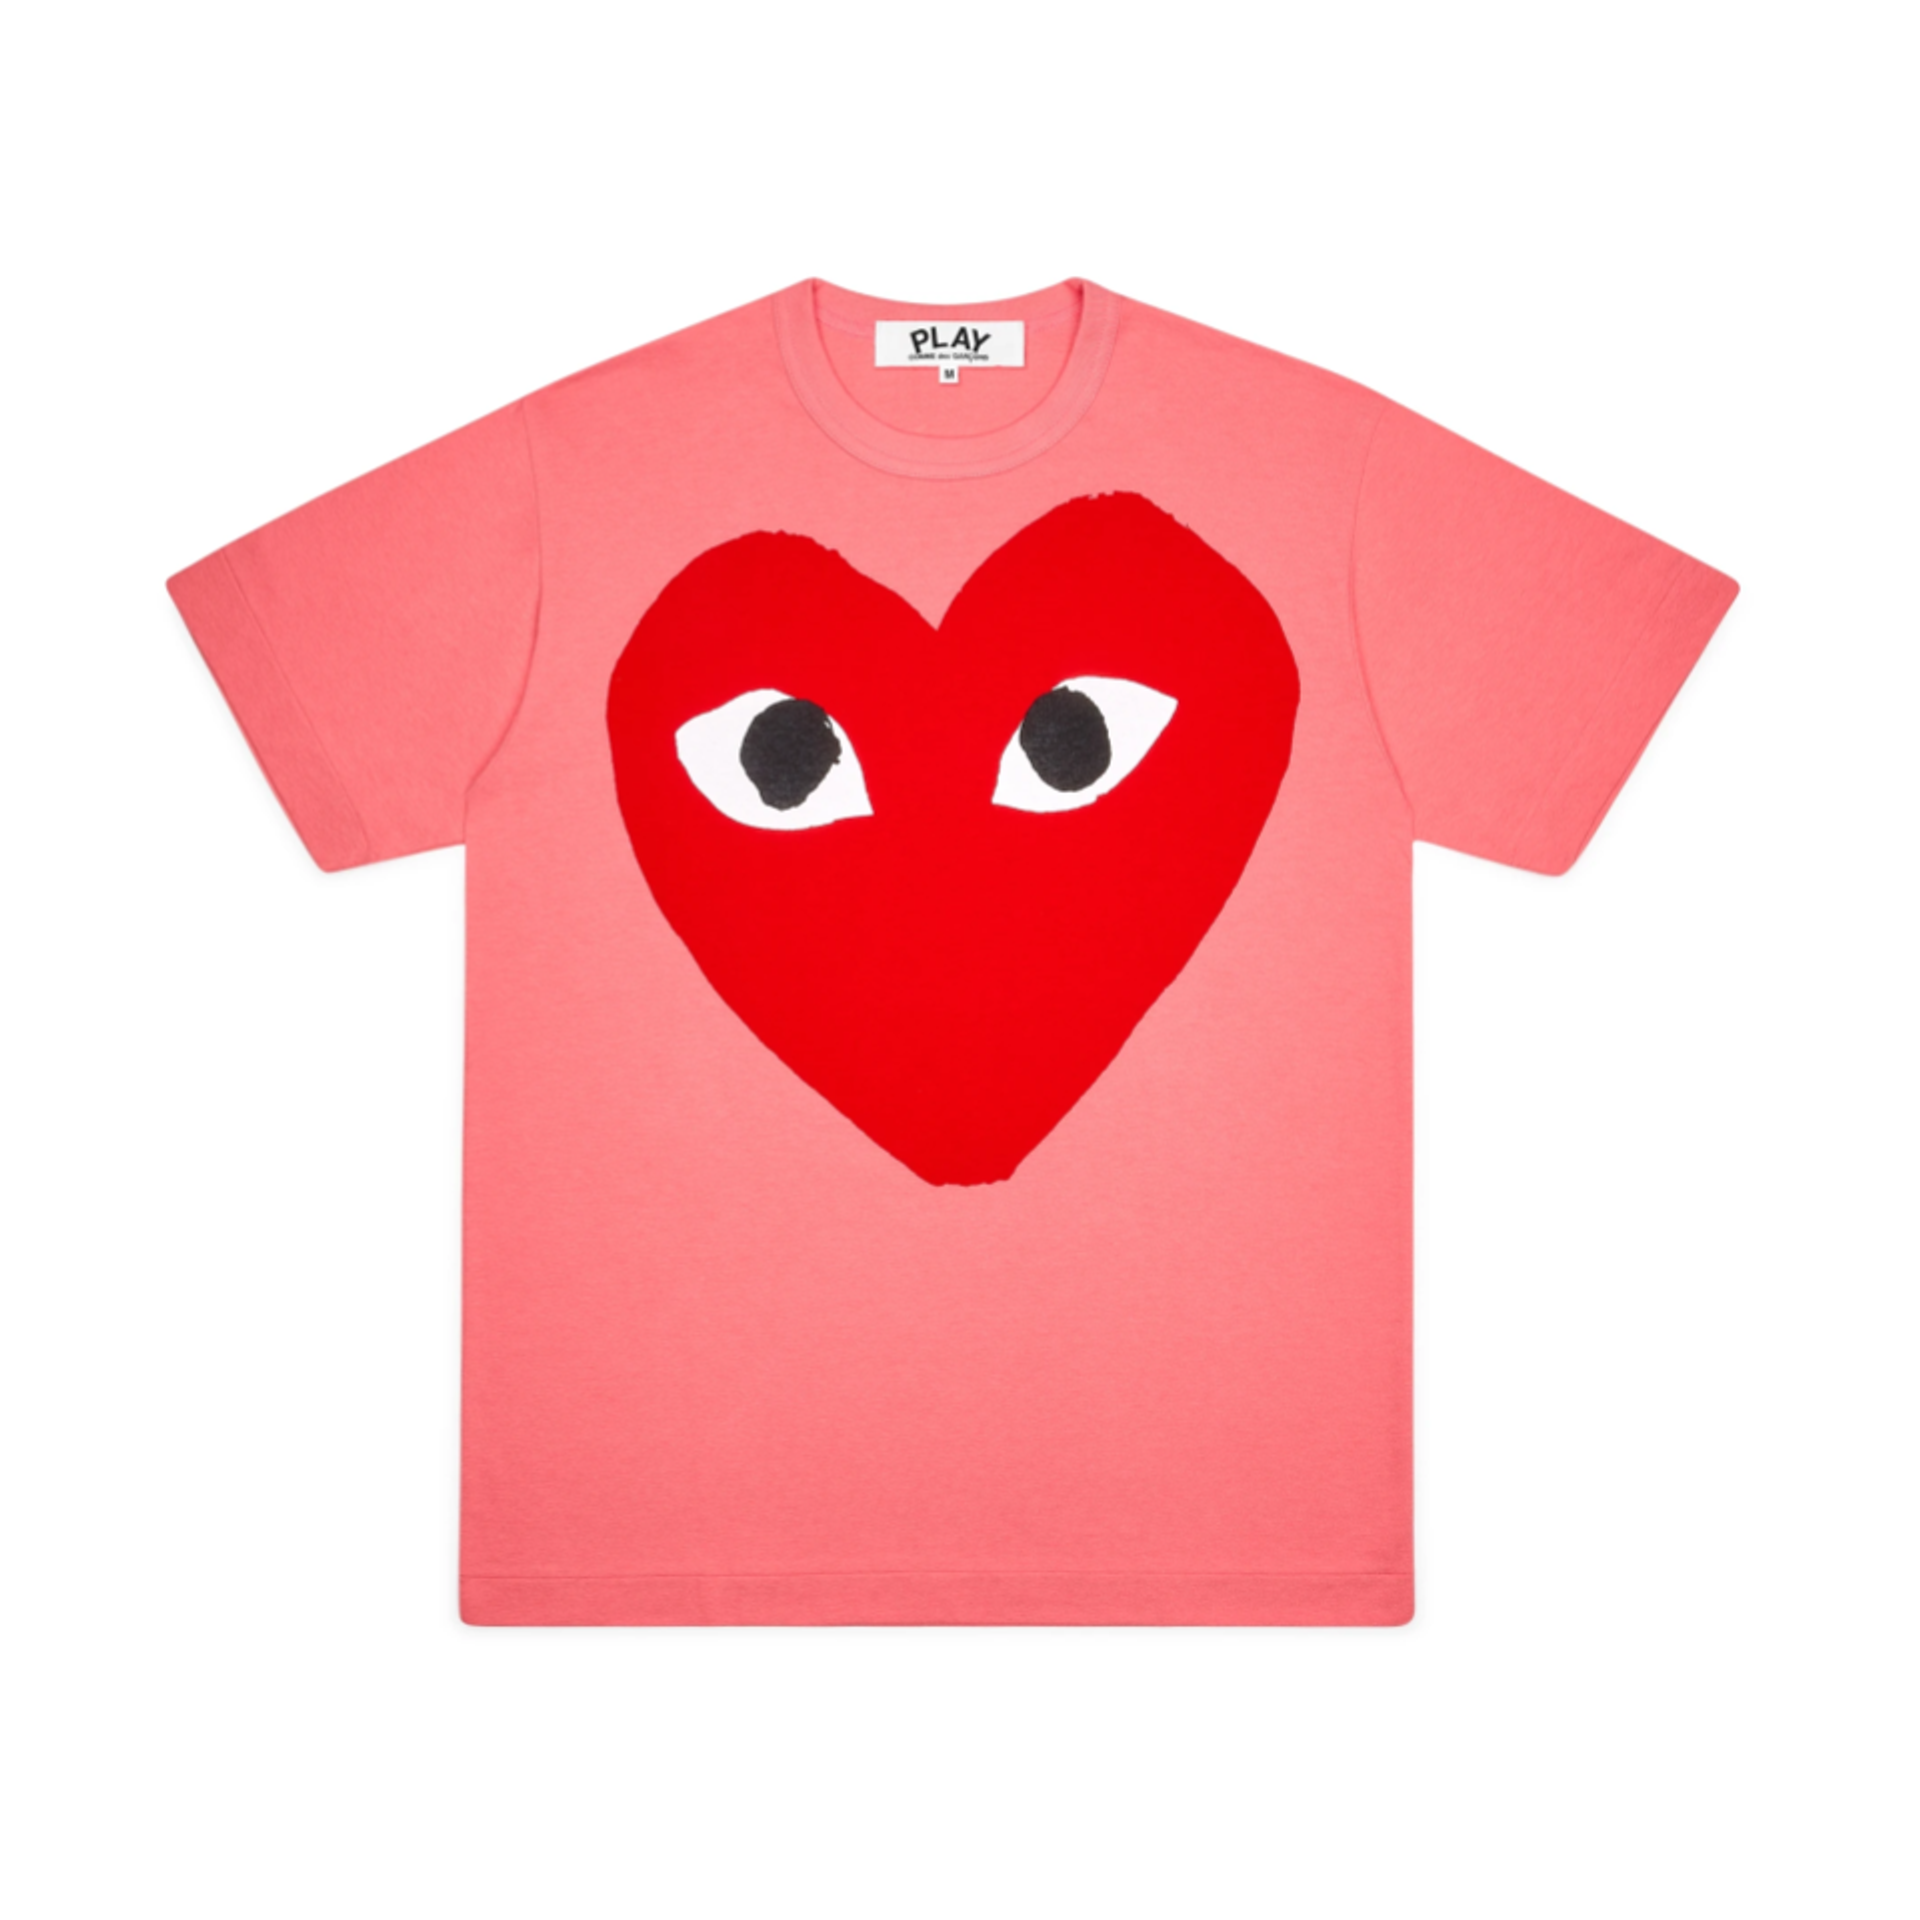 PLAY Comme des Garcons Big Red Heart T-Shirt (Pink) Men's